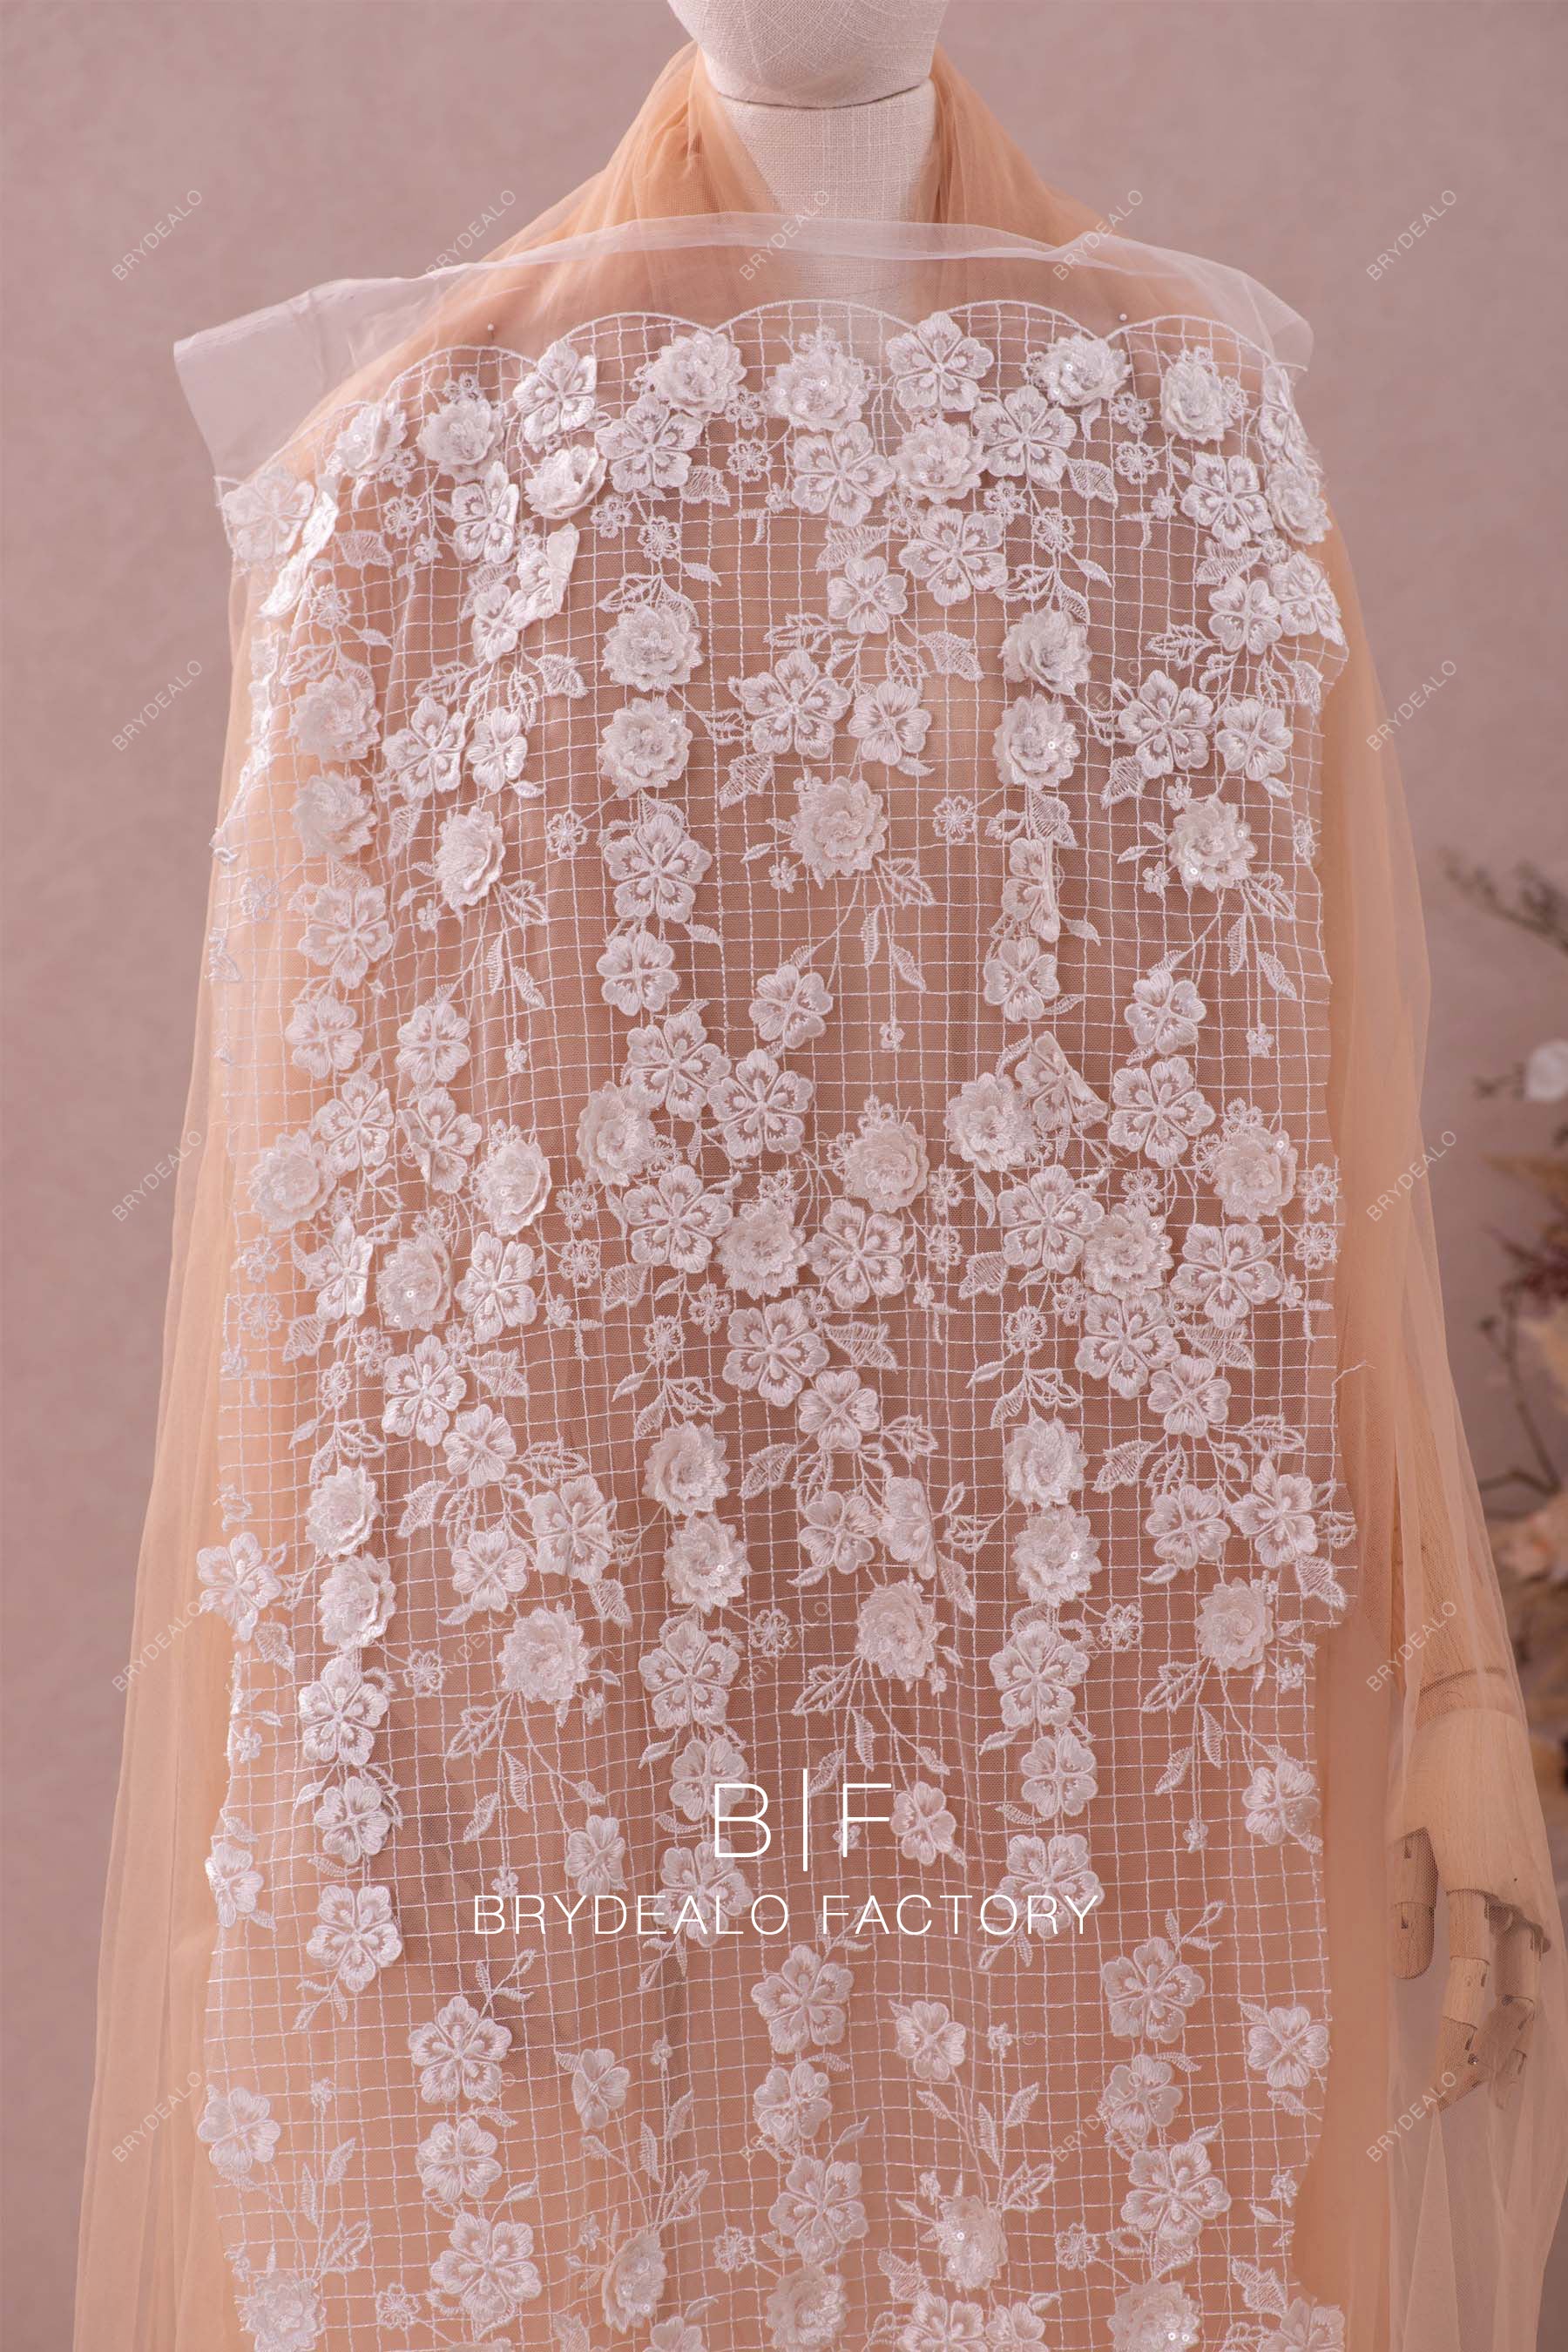 inwrought 3D flower lace